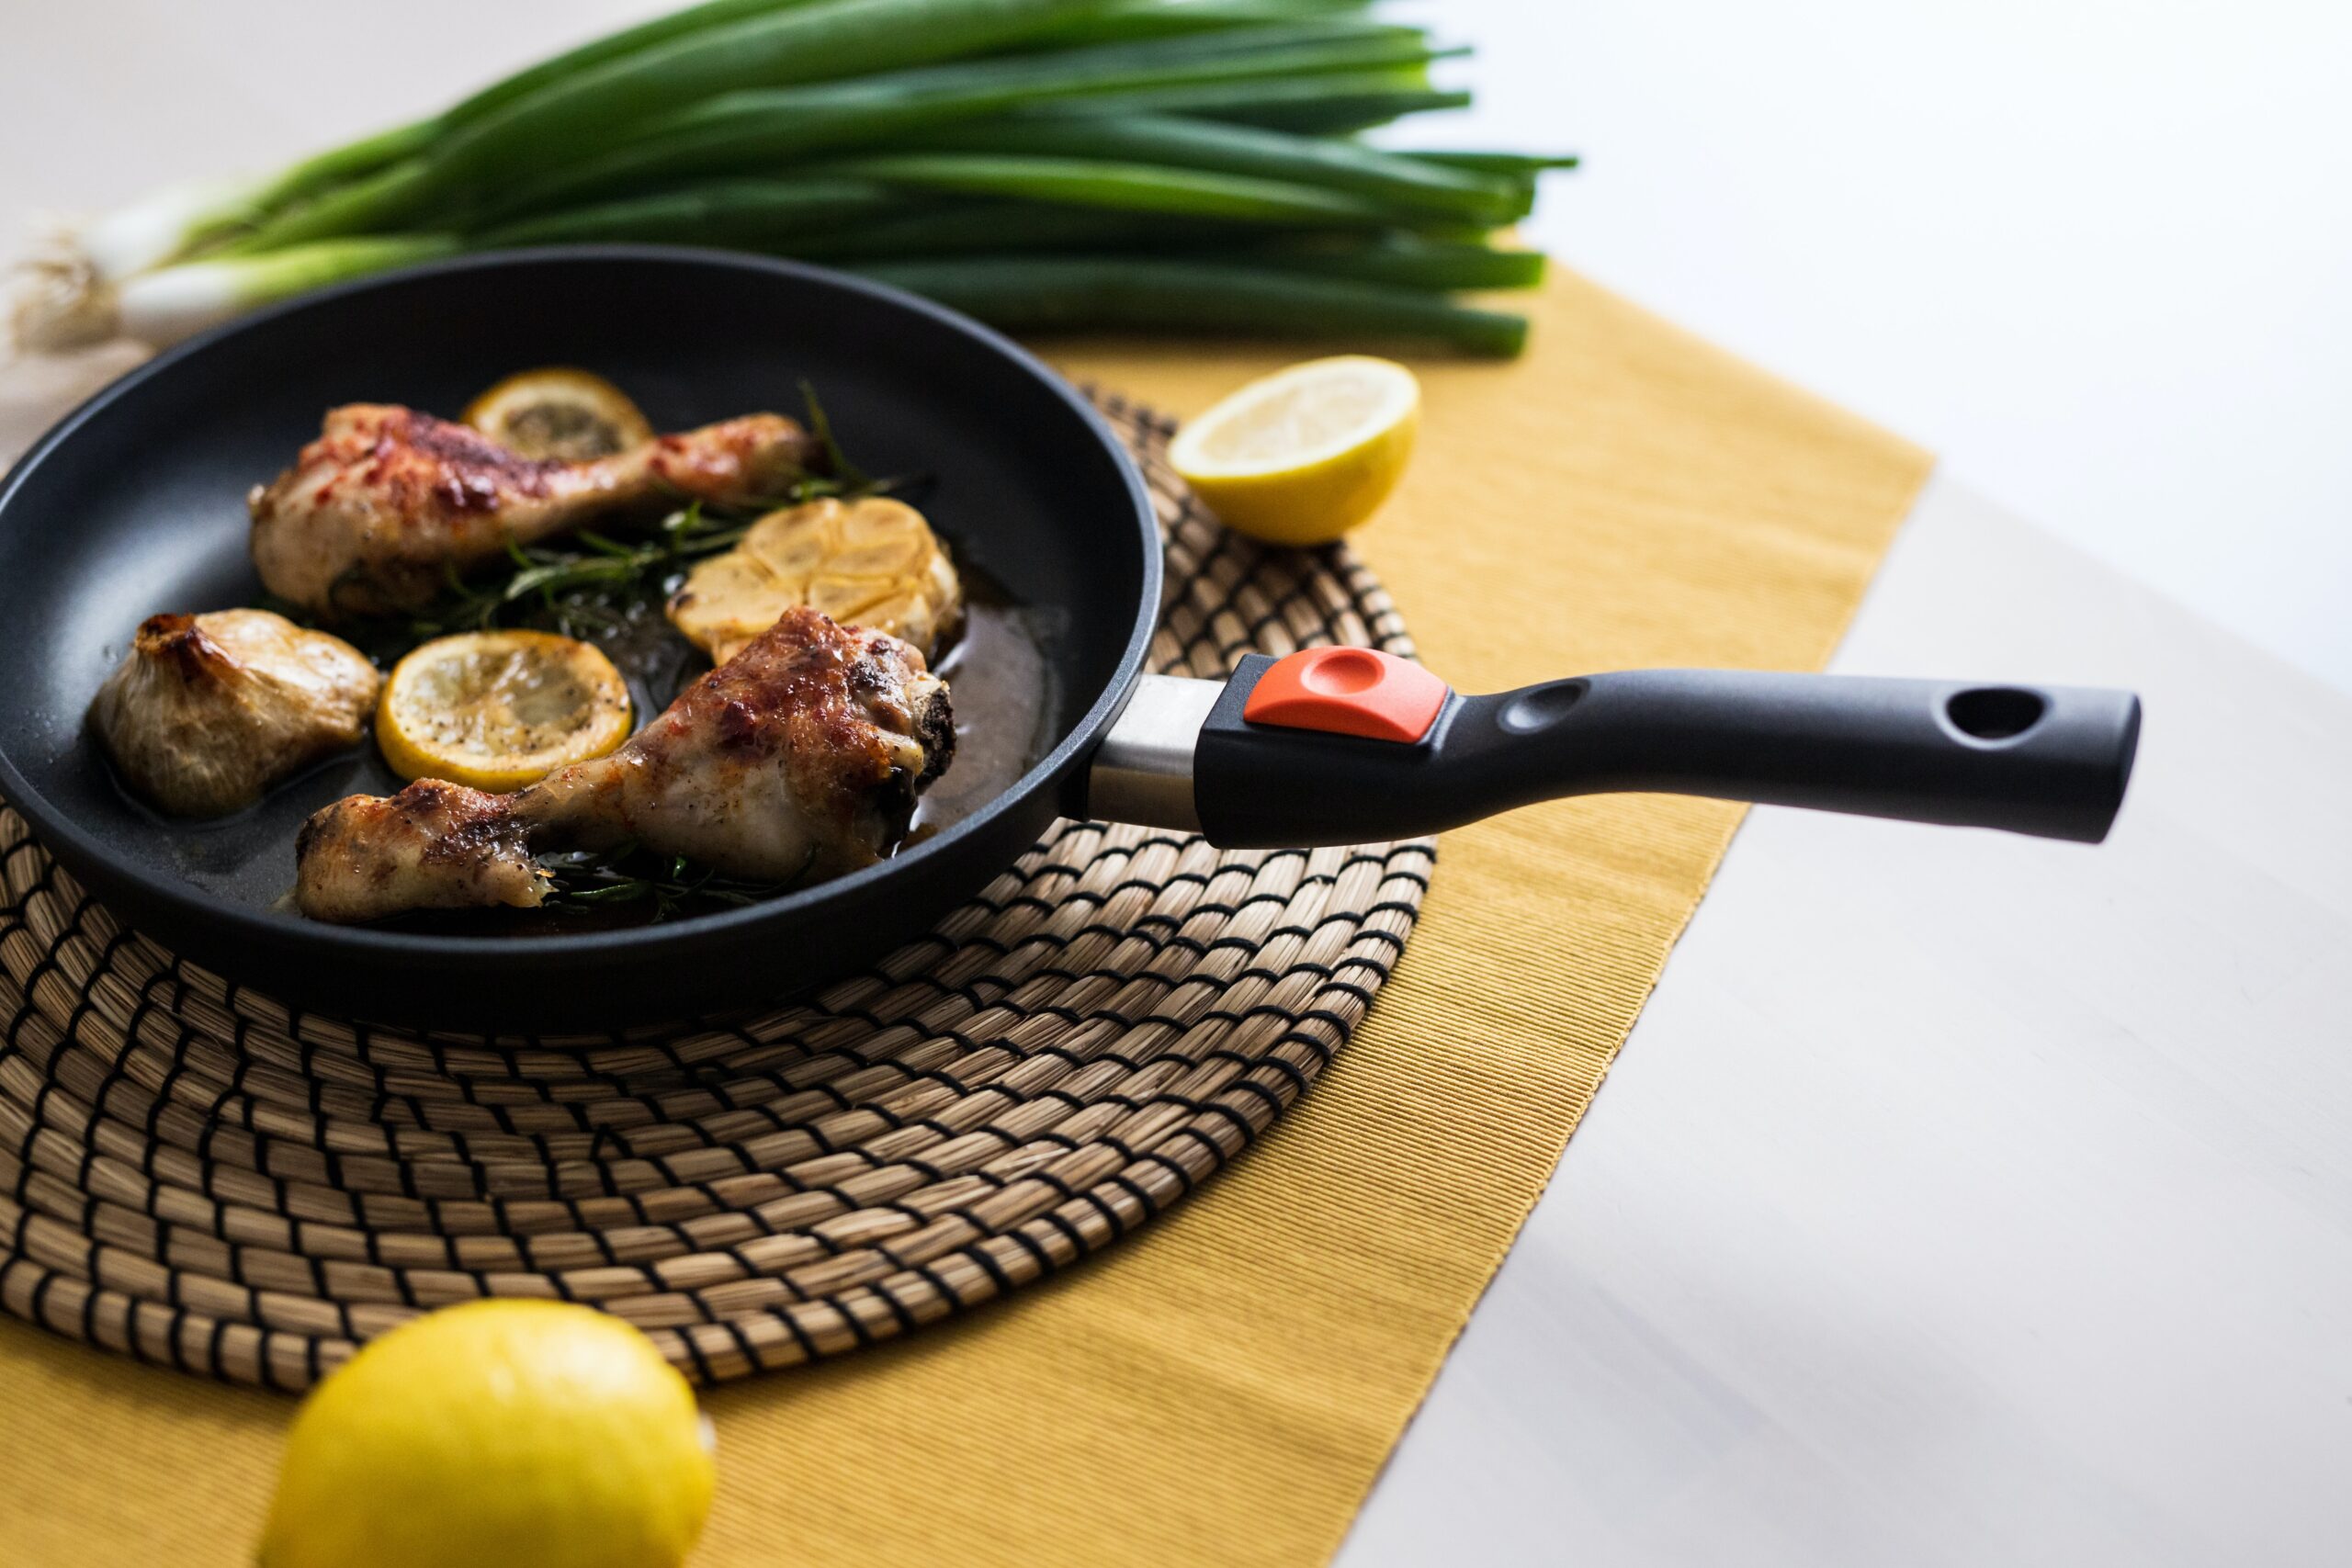 Achieve Perfect Induction Cooking with the Best Non-Stick Cookware